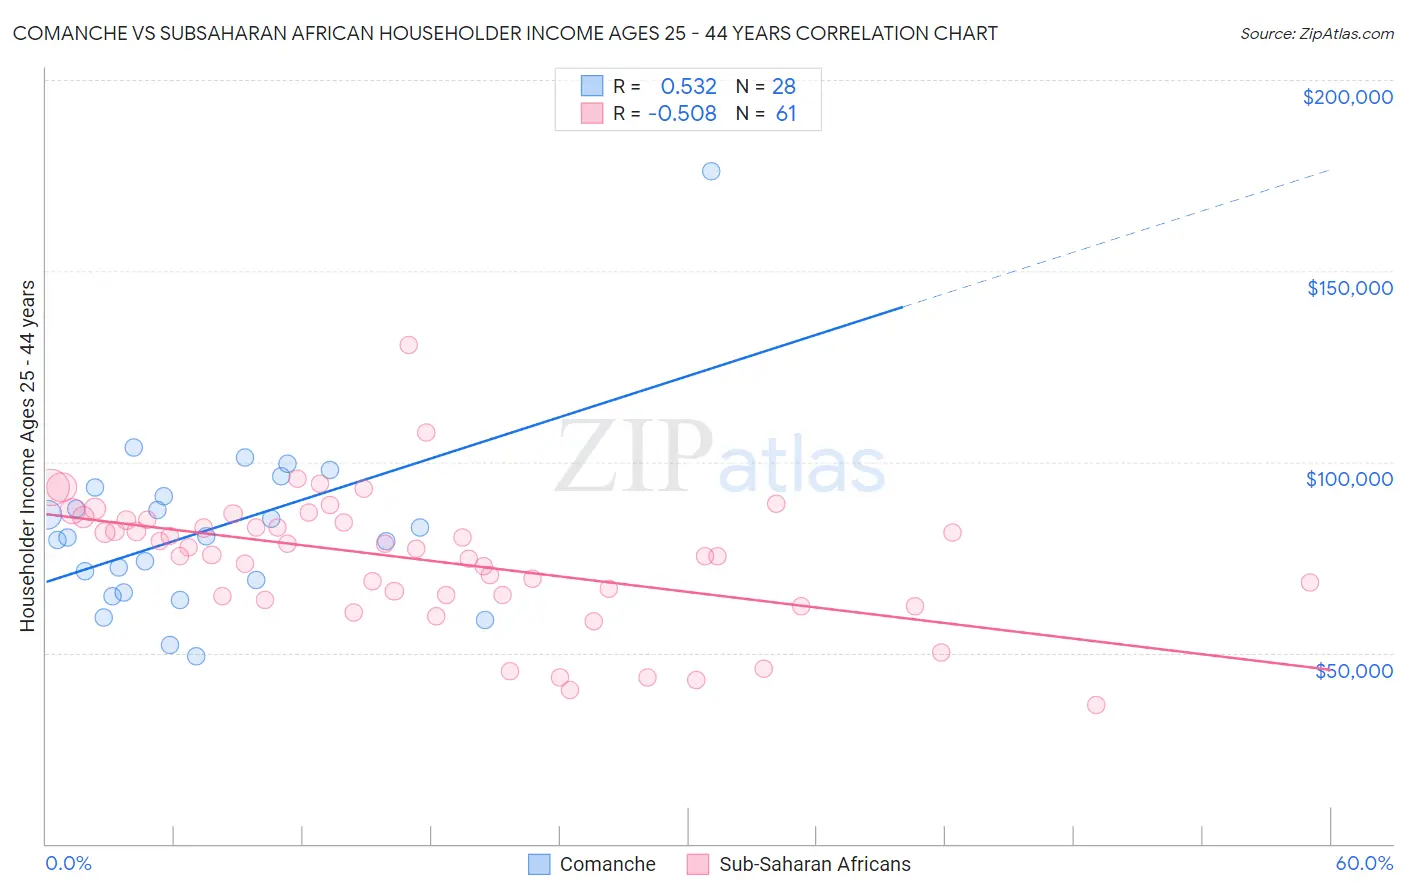 Comanche vs Subsaharan African Householder Income Ages 25 - 44 years